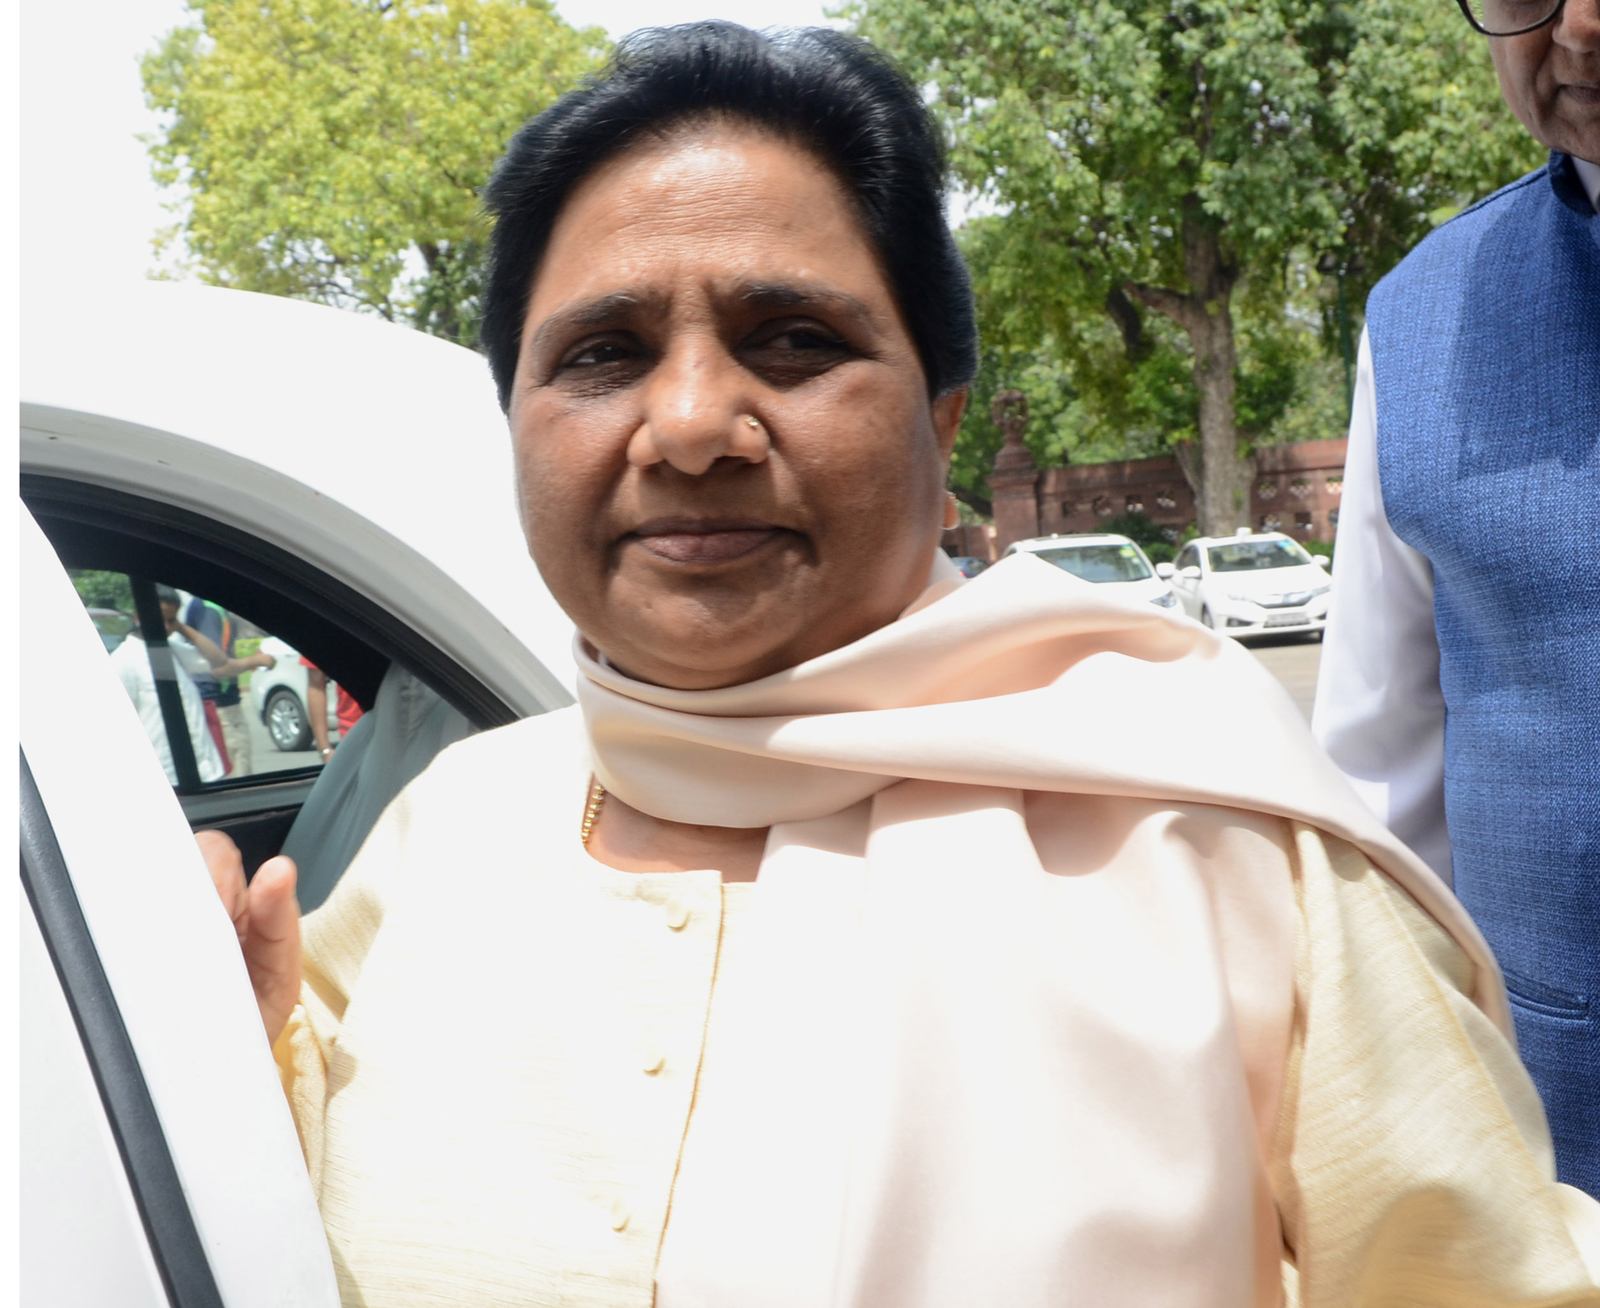 If Mayavati's Bahujan Samaj Party fails to make an impact, the Congress will be free to attack her bargaining power in Uttar Pradesh and perhaps even force her to align with it in states like Maharashtra and Gujarat